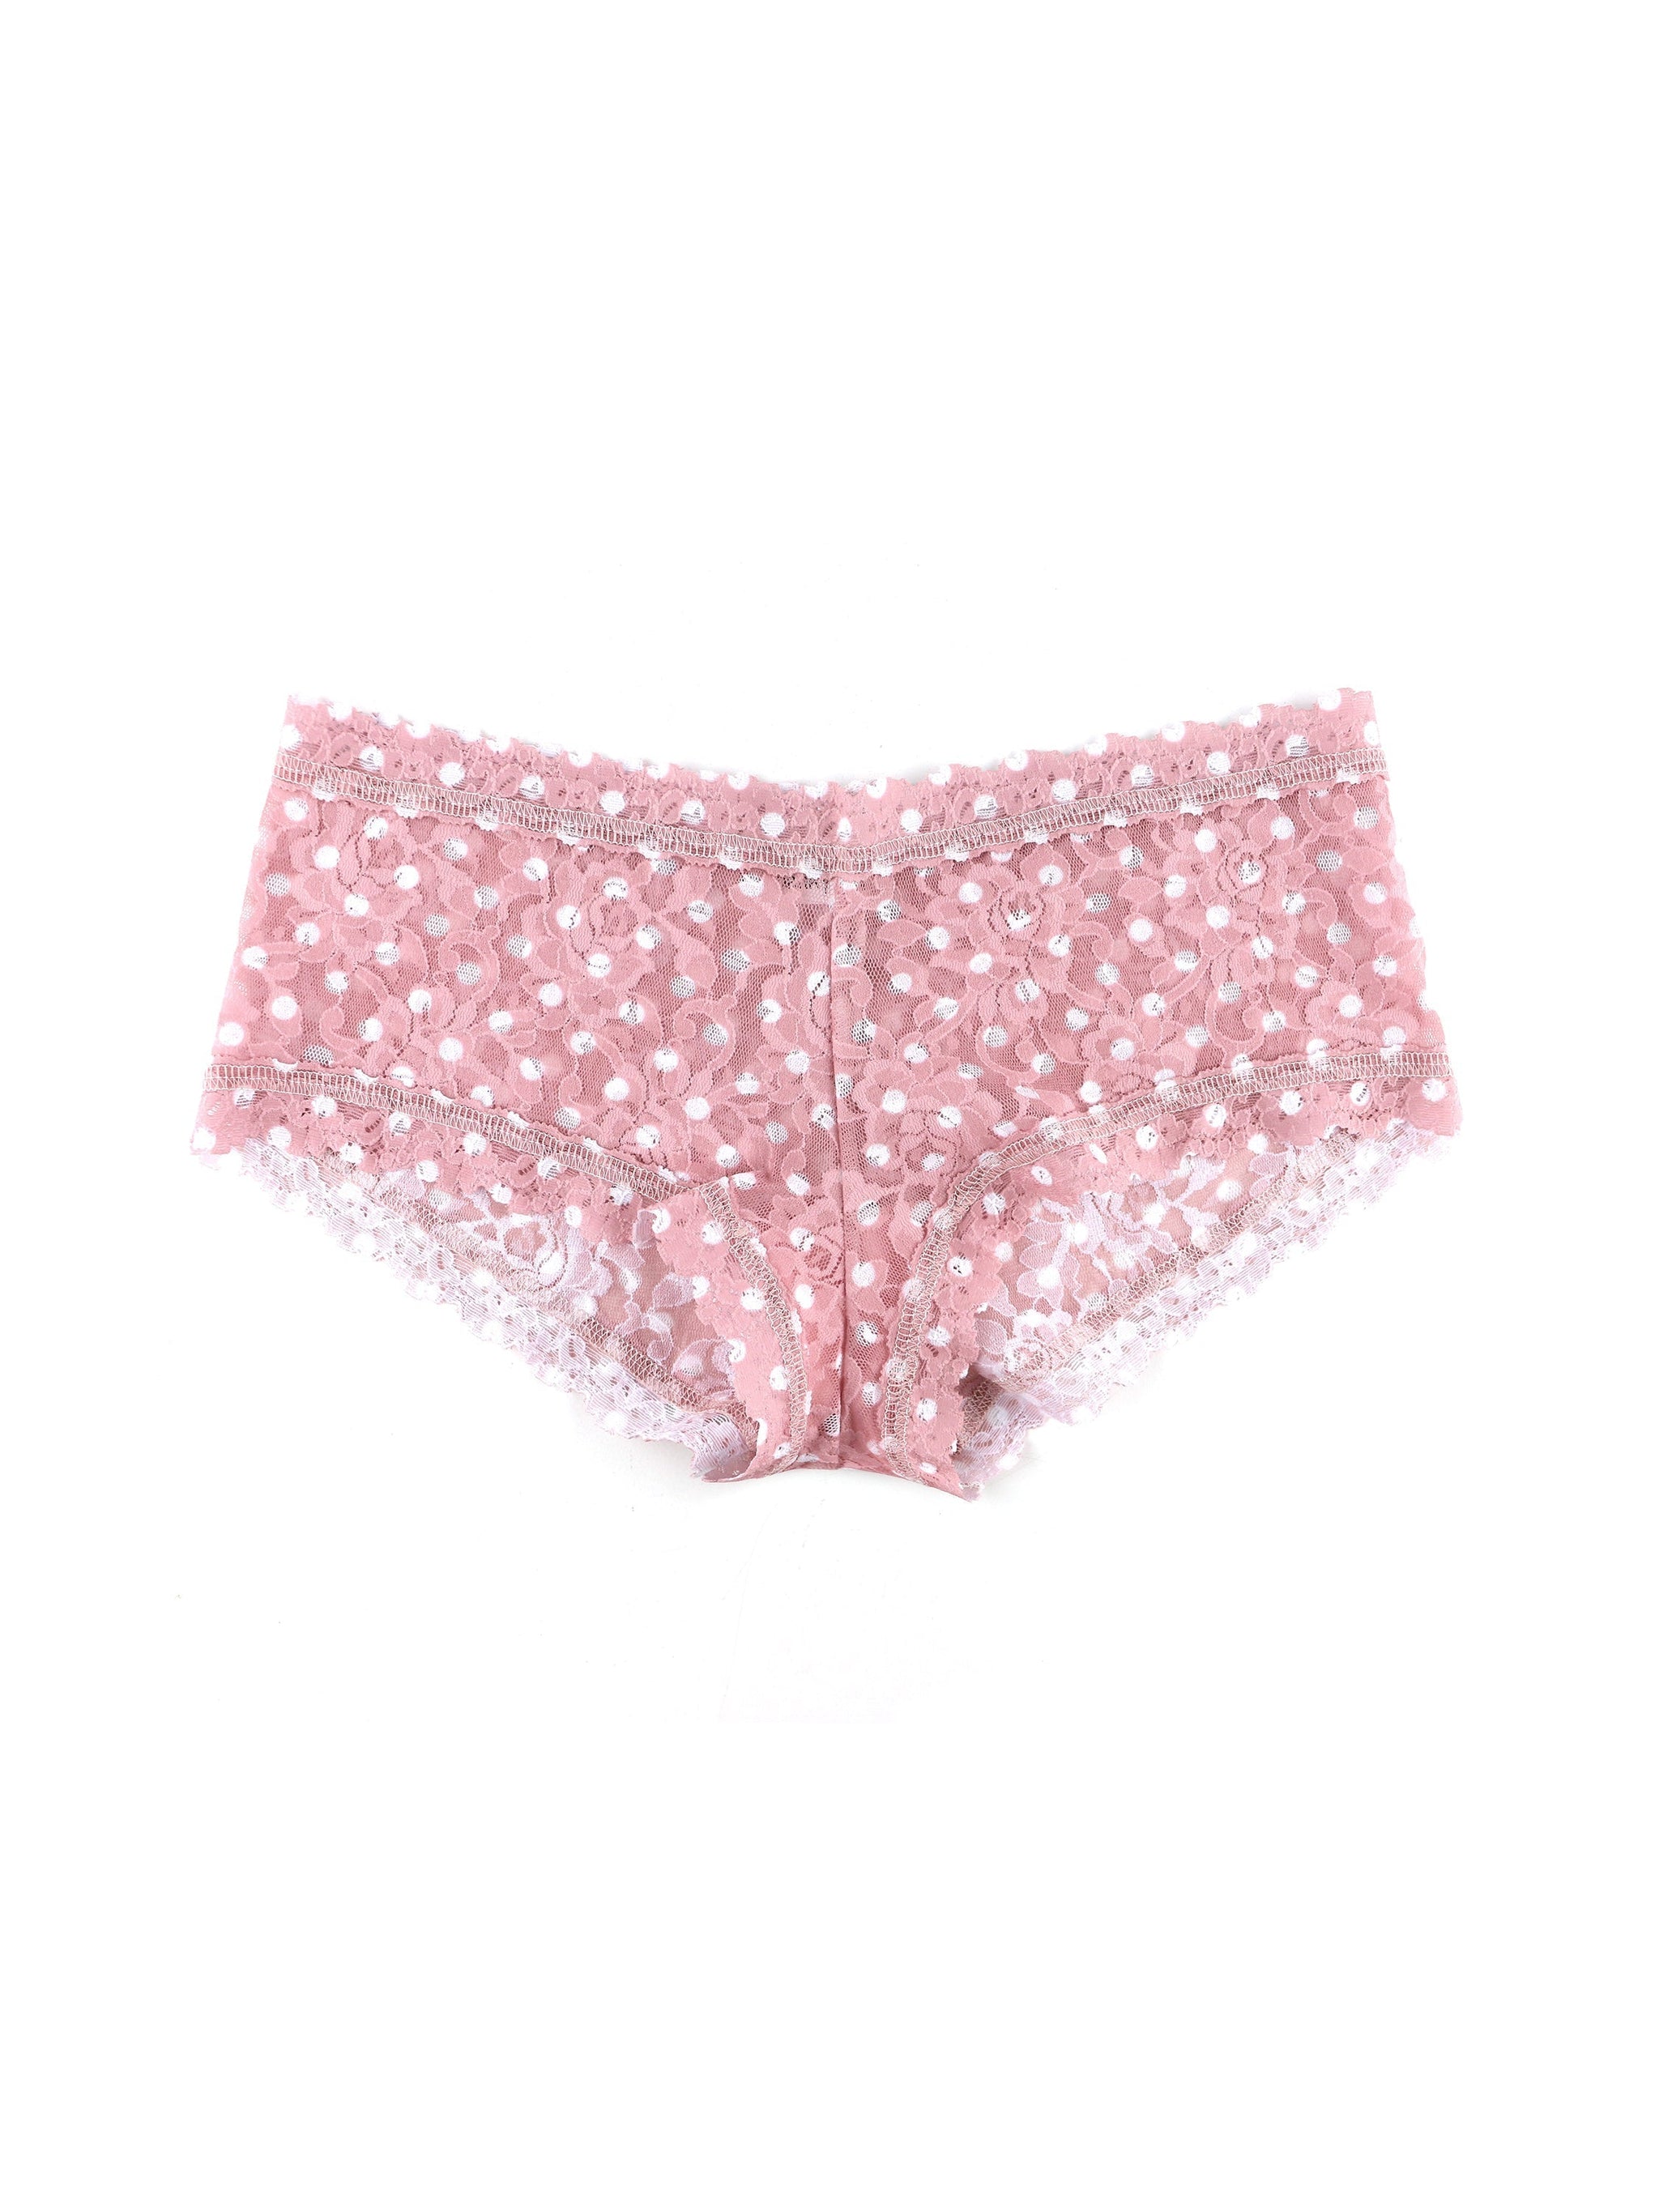 Printed Signature Lace Boyshort Pink Frosting Sale